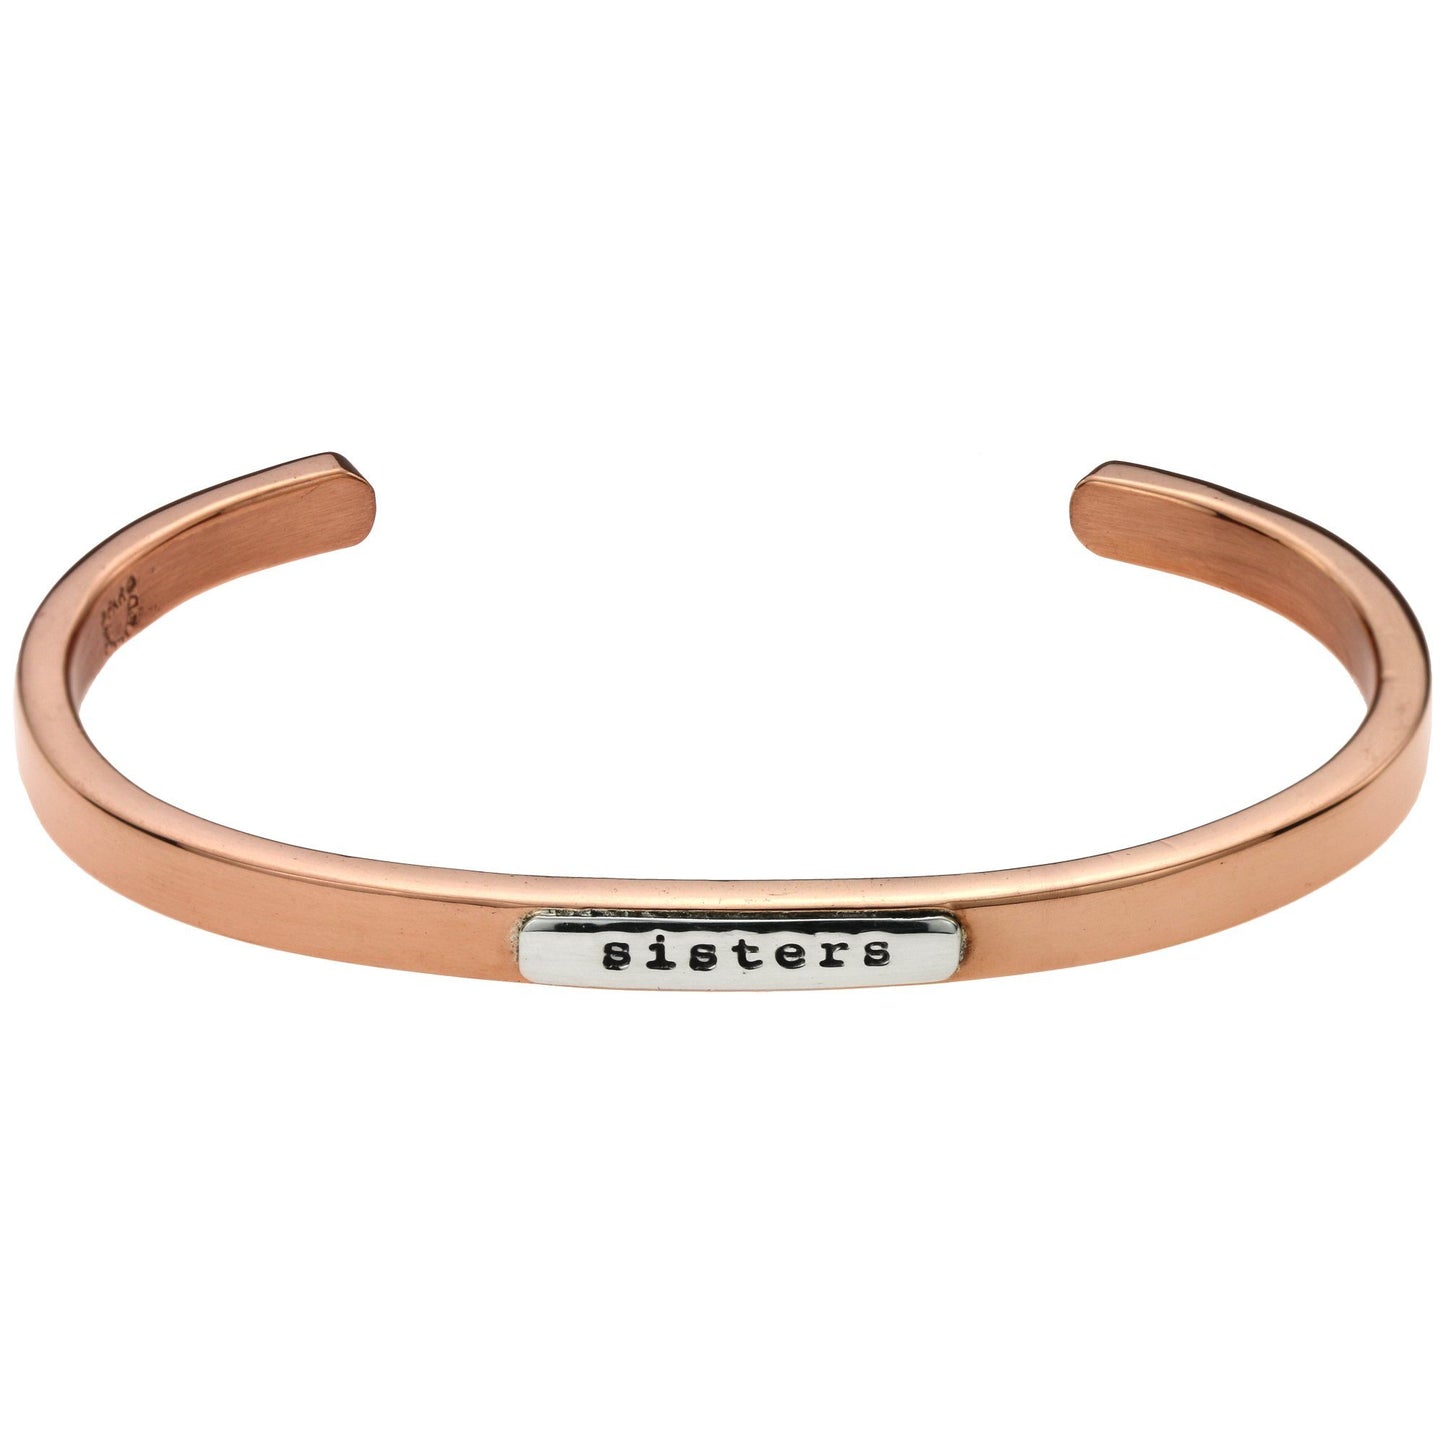 Sisters Forever Copper & Sterling Stackable Cuff Bracelet